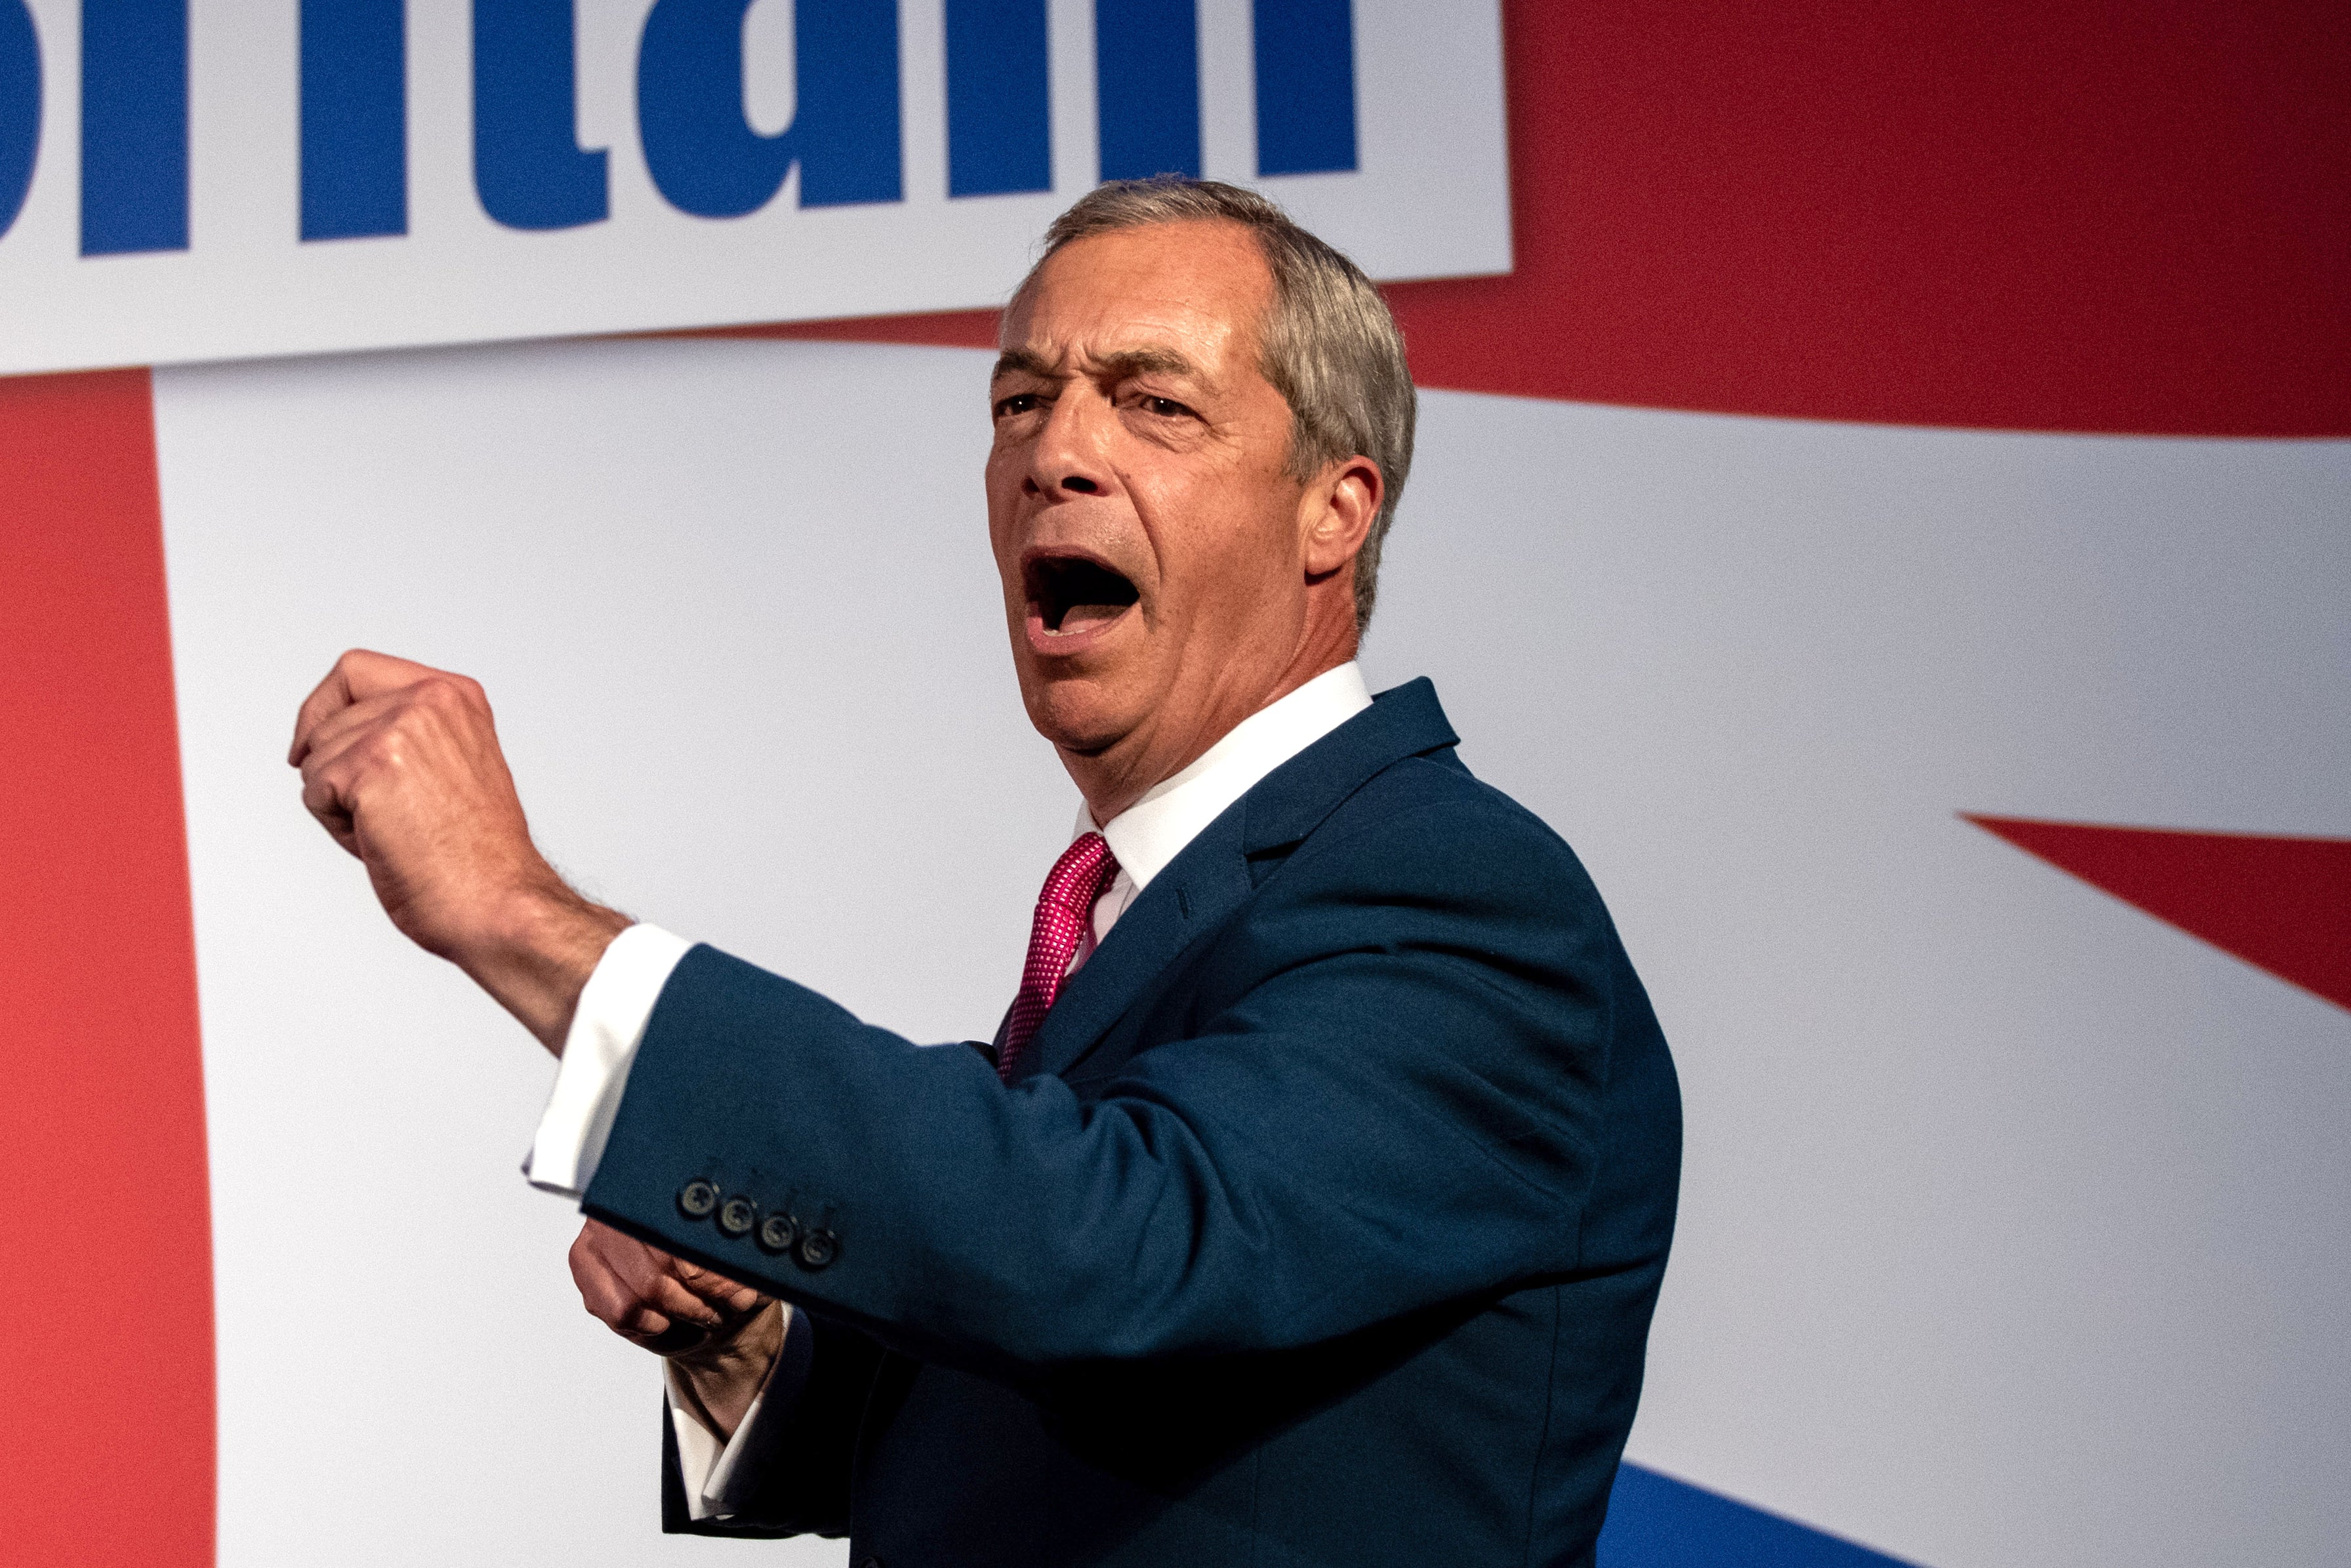 In 2019, Nigel Farage’s Brexit Party stood only in seats where Labour was the main competition